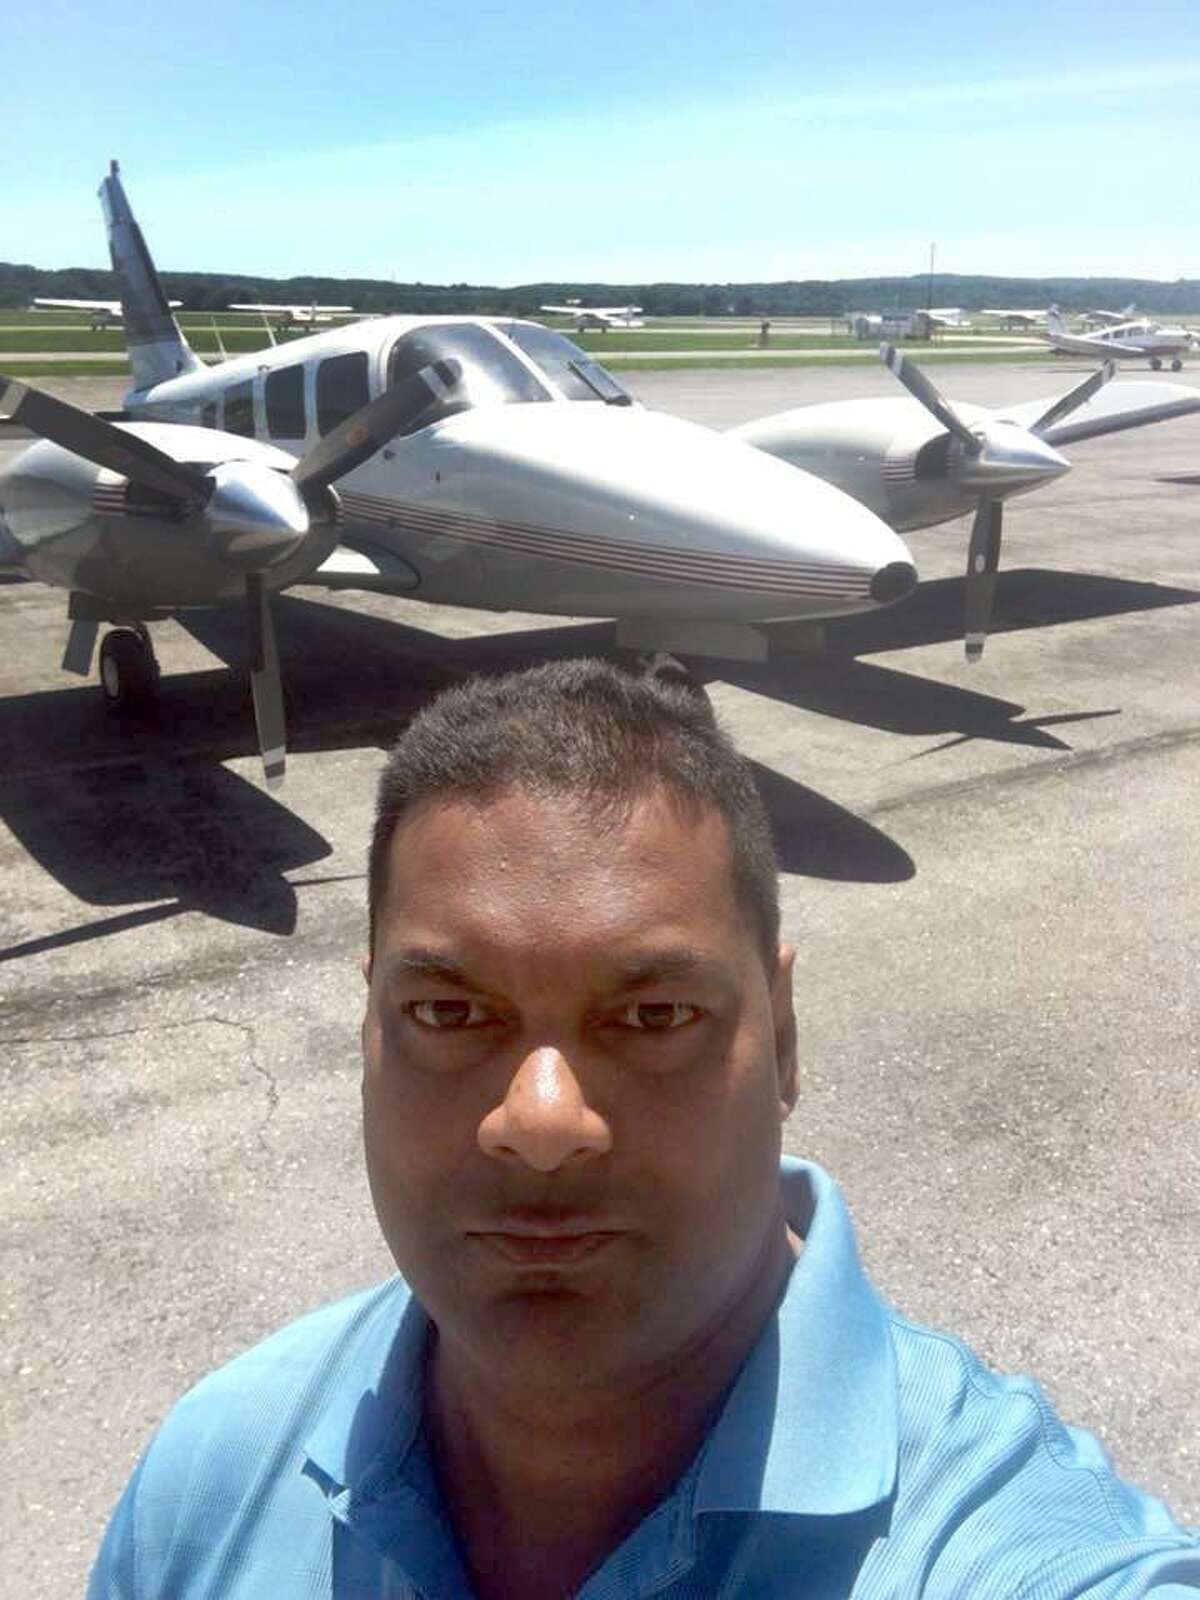 Authorities have identified 41-year-old Munidat Raj Persaud of Waterbury as the owner and pilot of the Piper twin turbo prop airplane that crashed into the water about three miles southeast of Francis S. Gabreski Airport in Westhampton Beach, N.Y. Saturday afternoon.